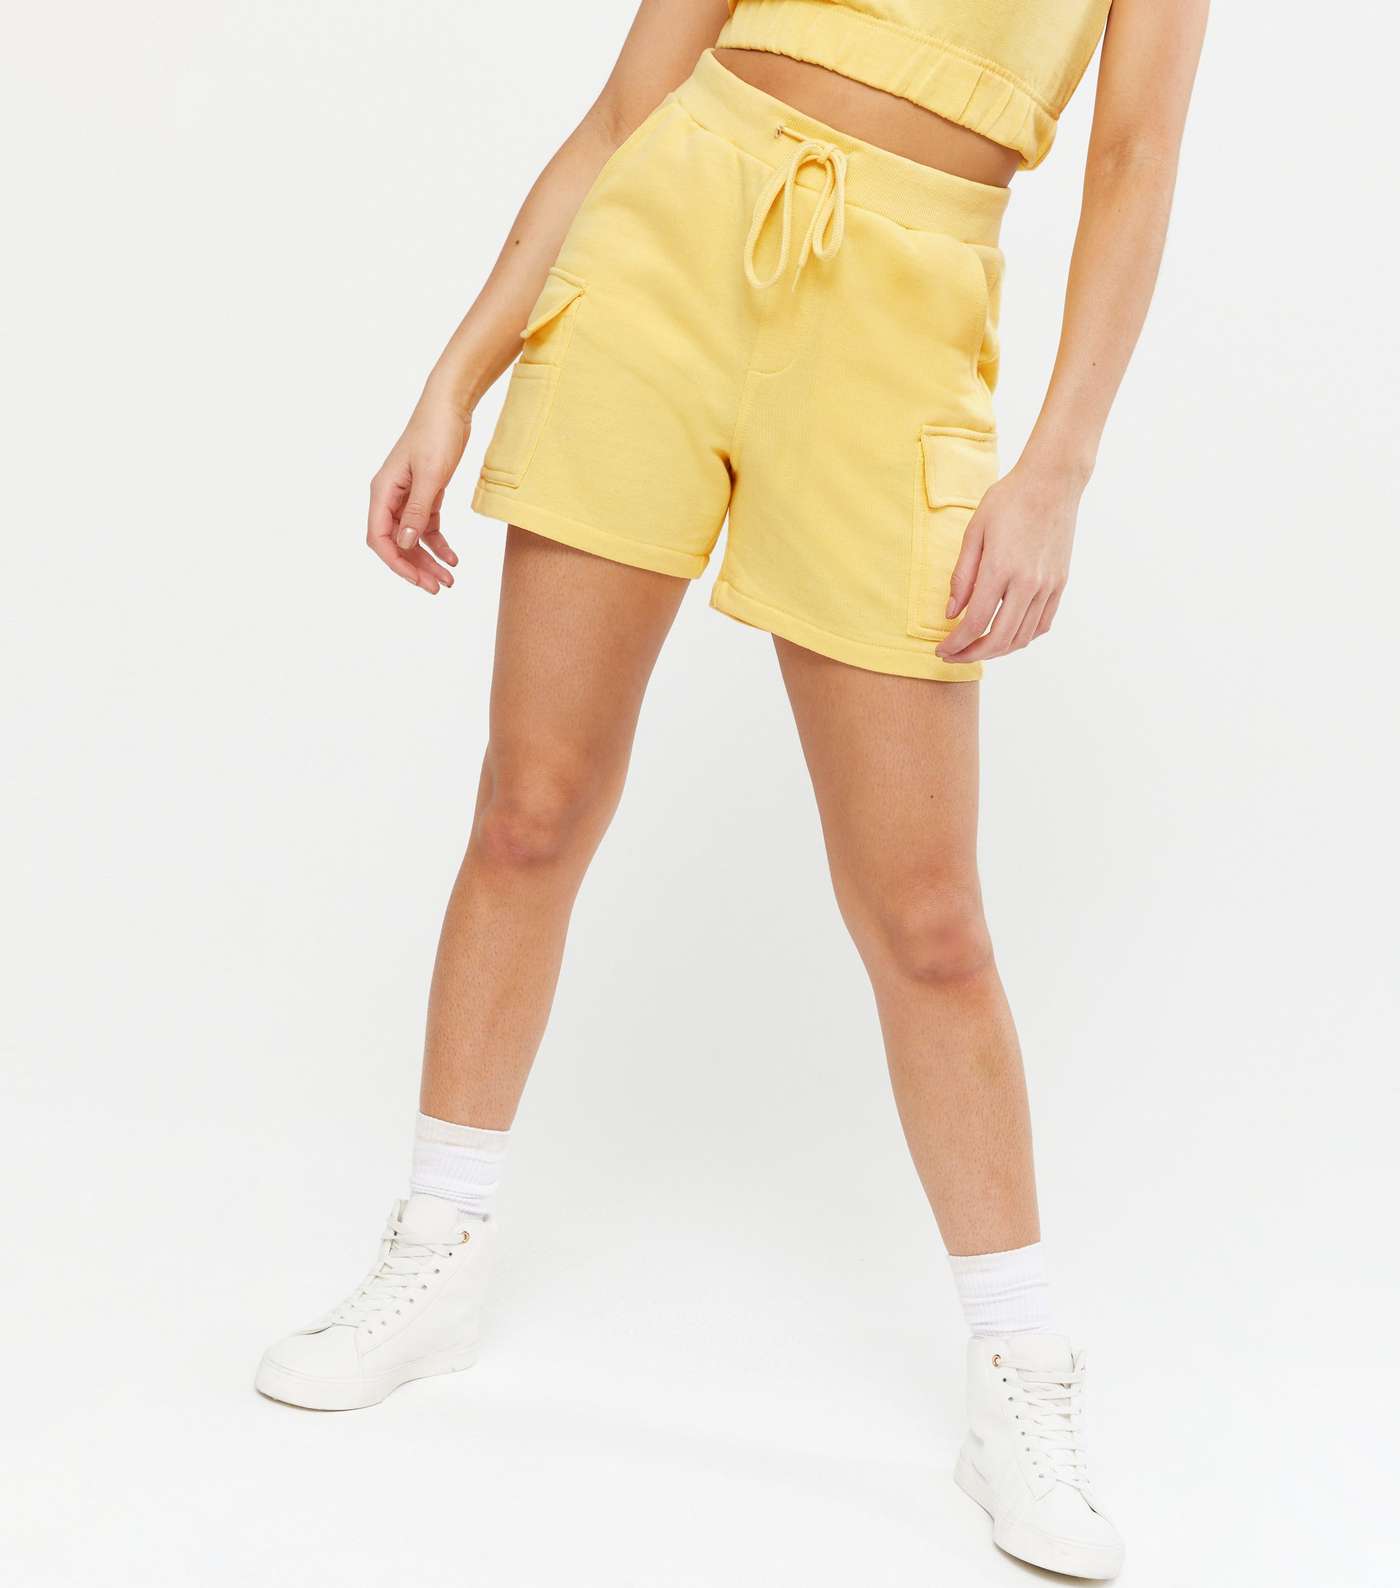 Cameo Rose Pale Yellow Utility Crop Top and Shorts Set Image 3